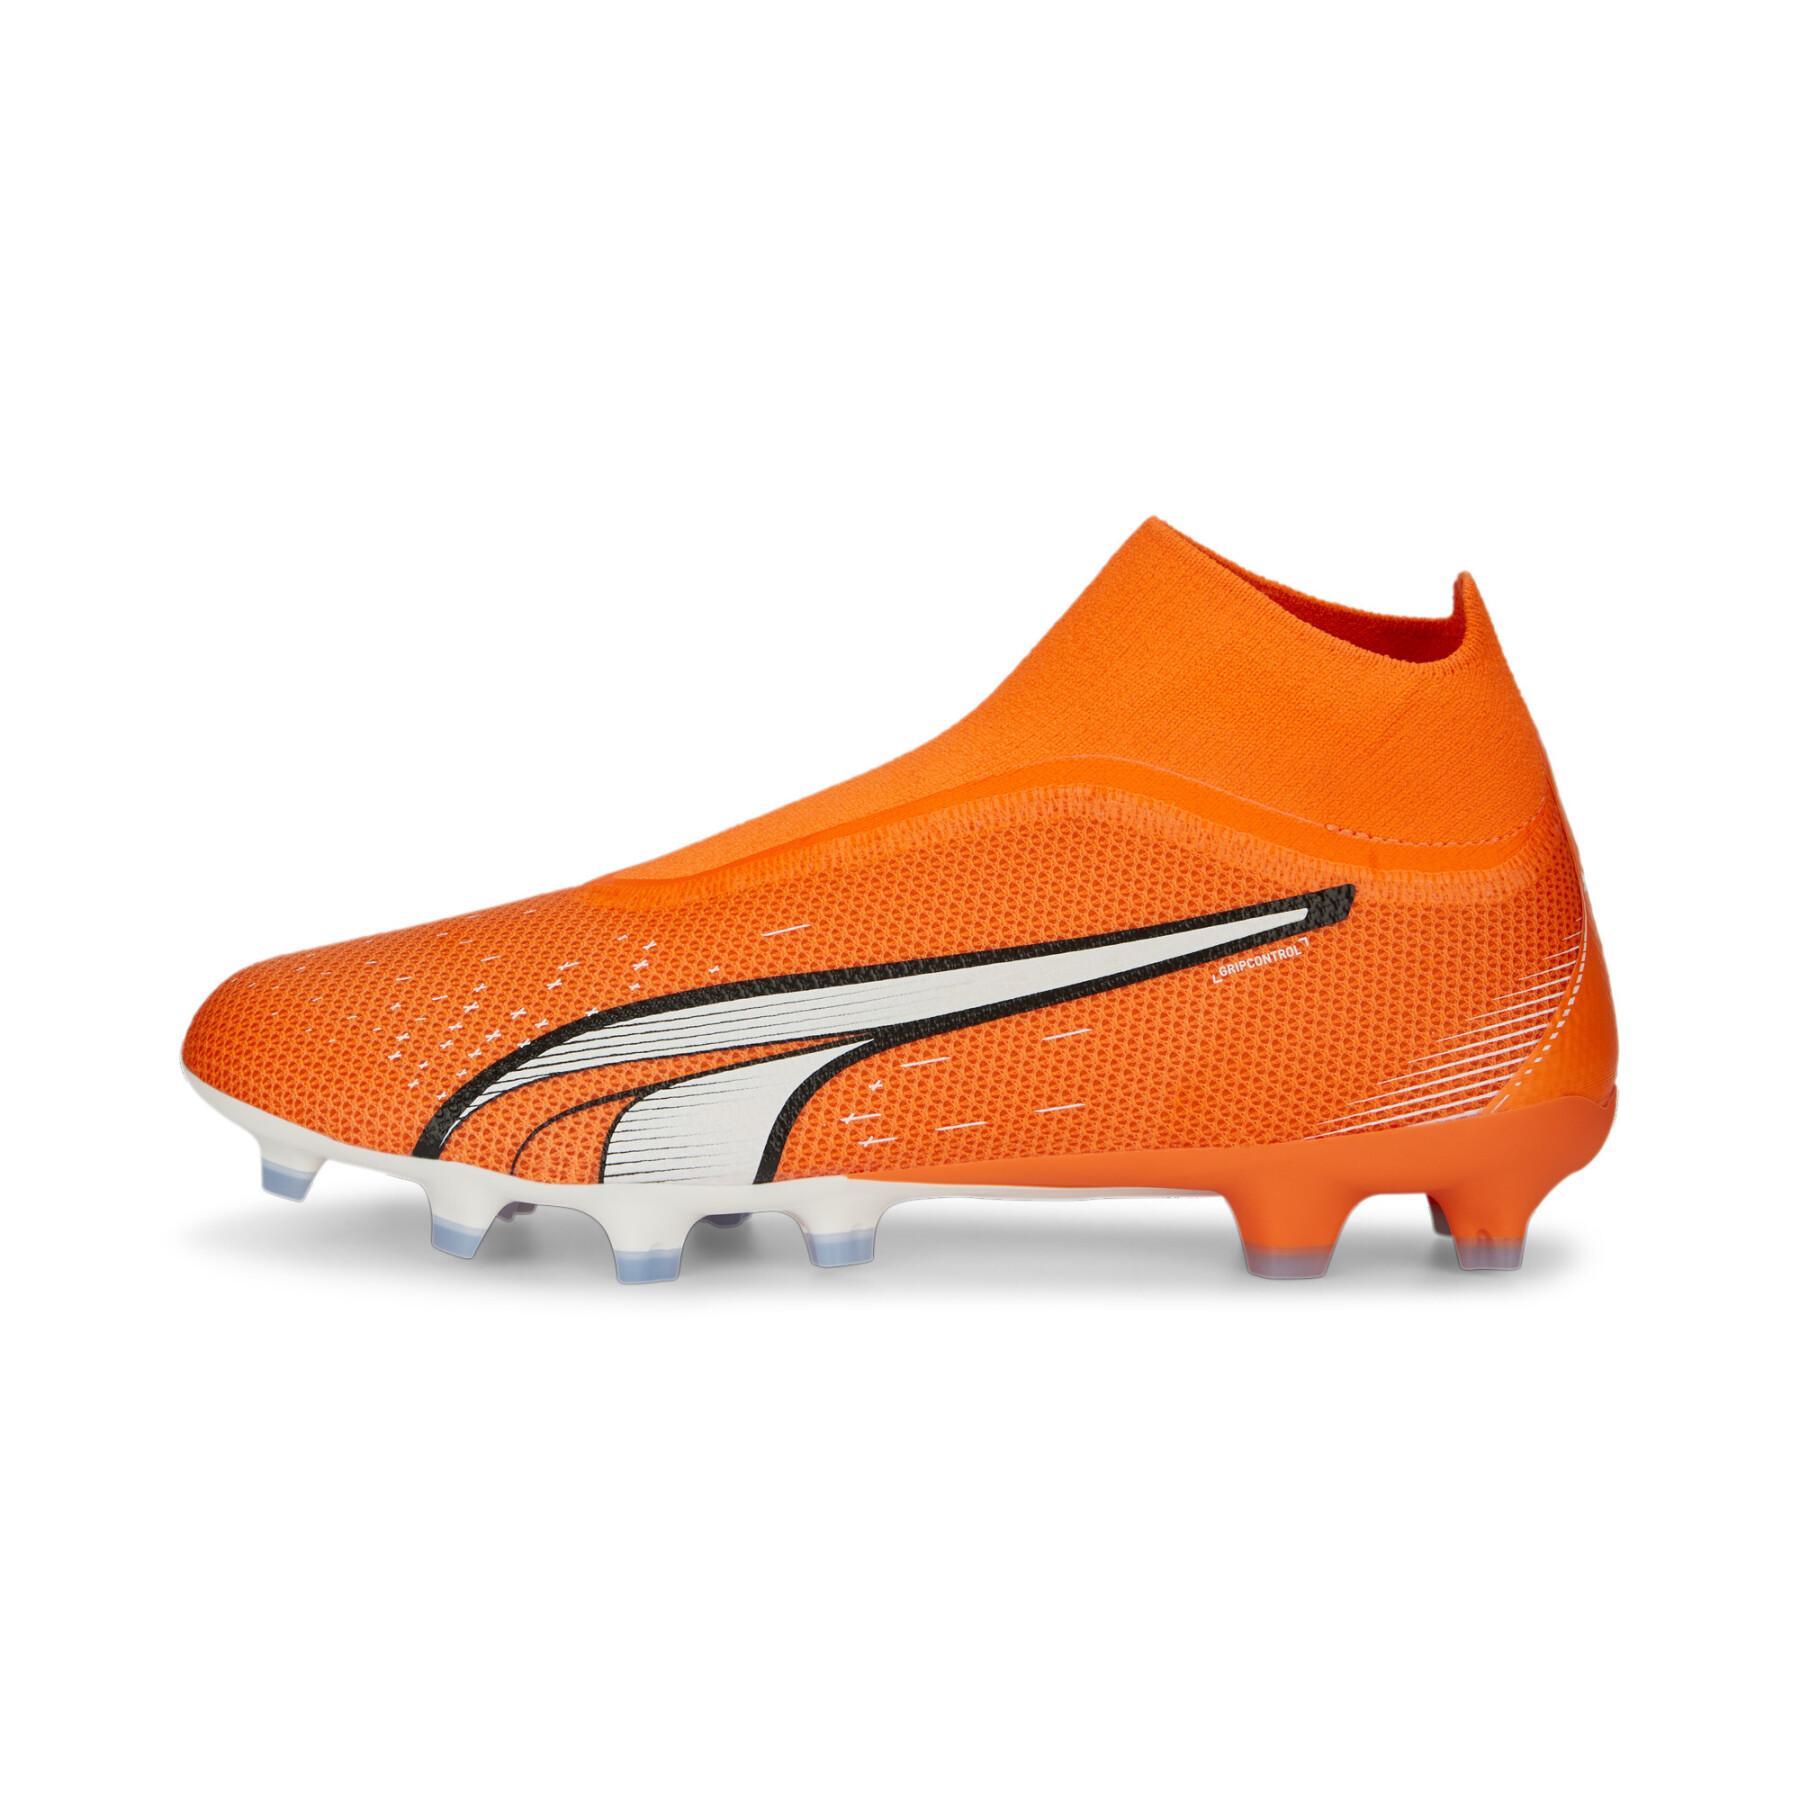 Soccer shoes without laces Puma Ultra Match FG/AG